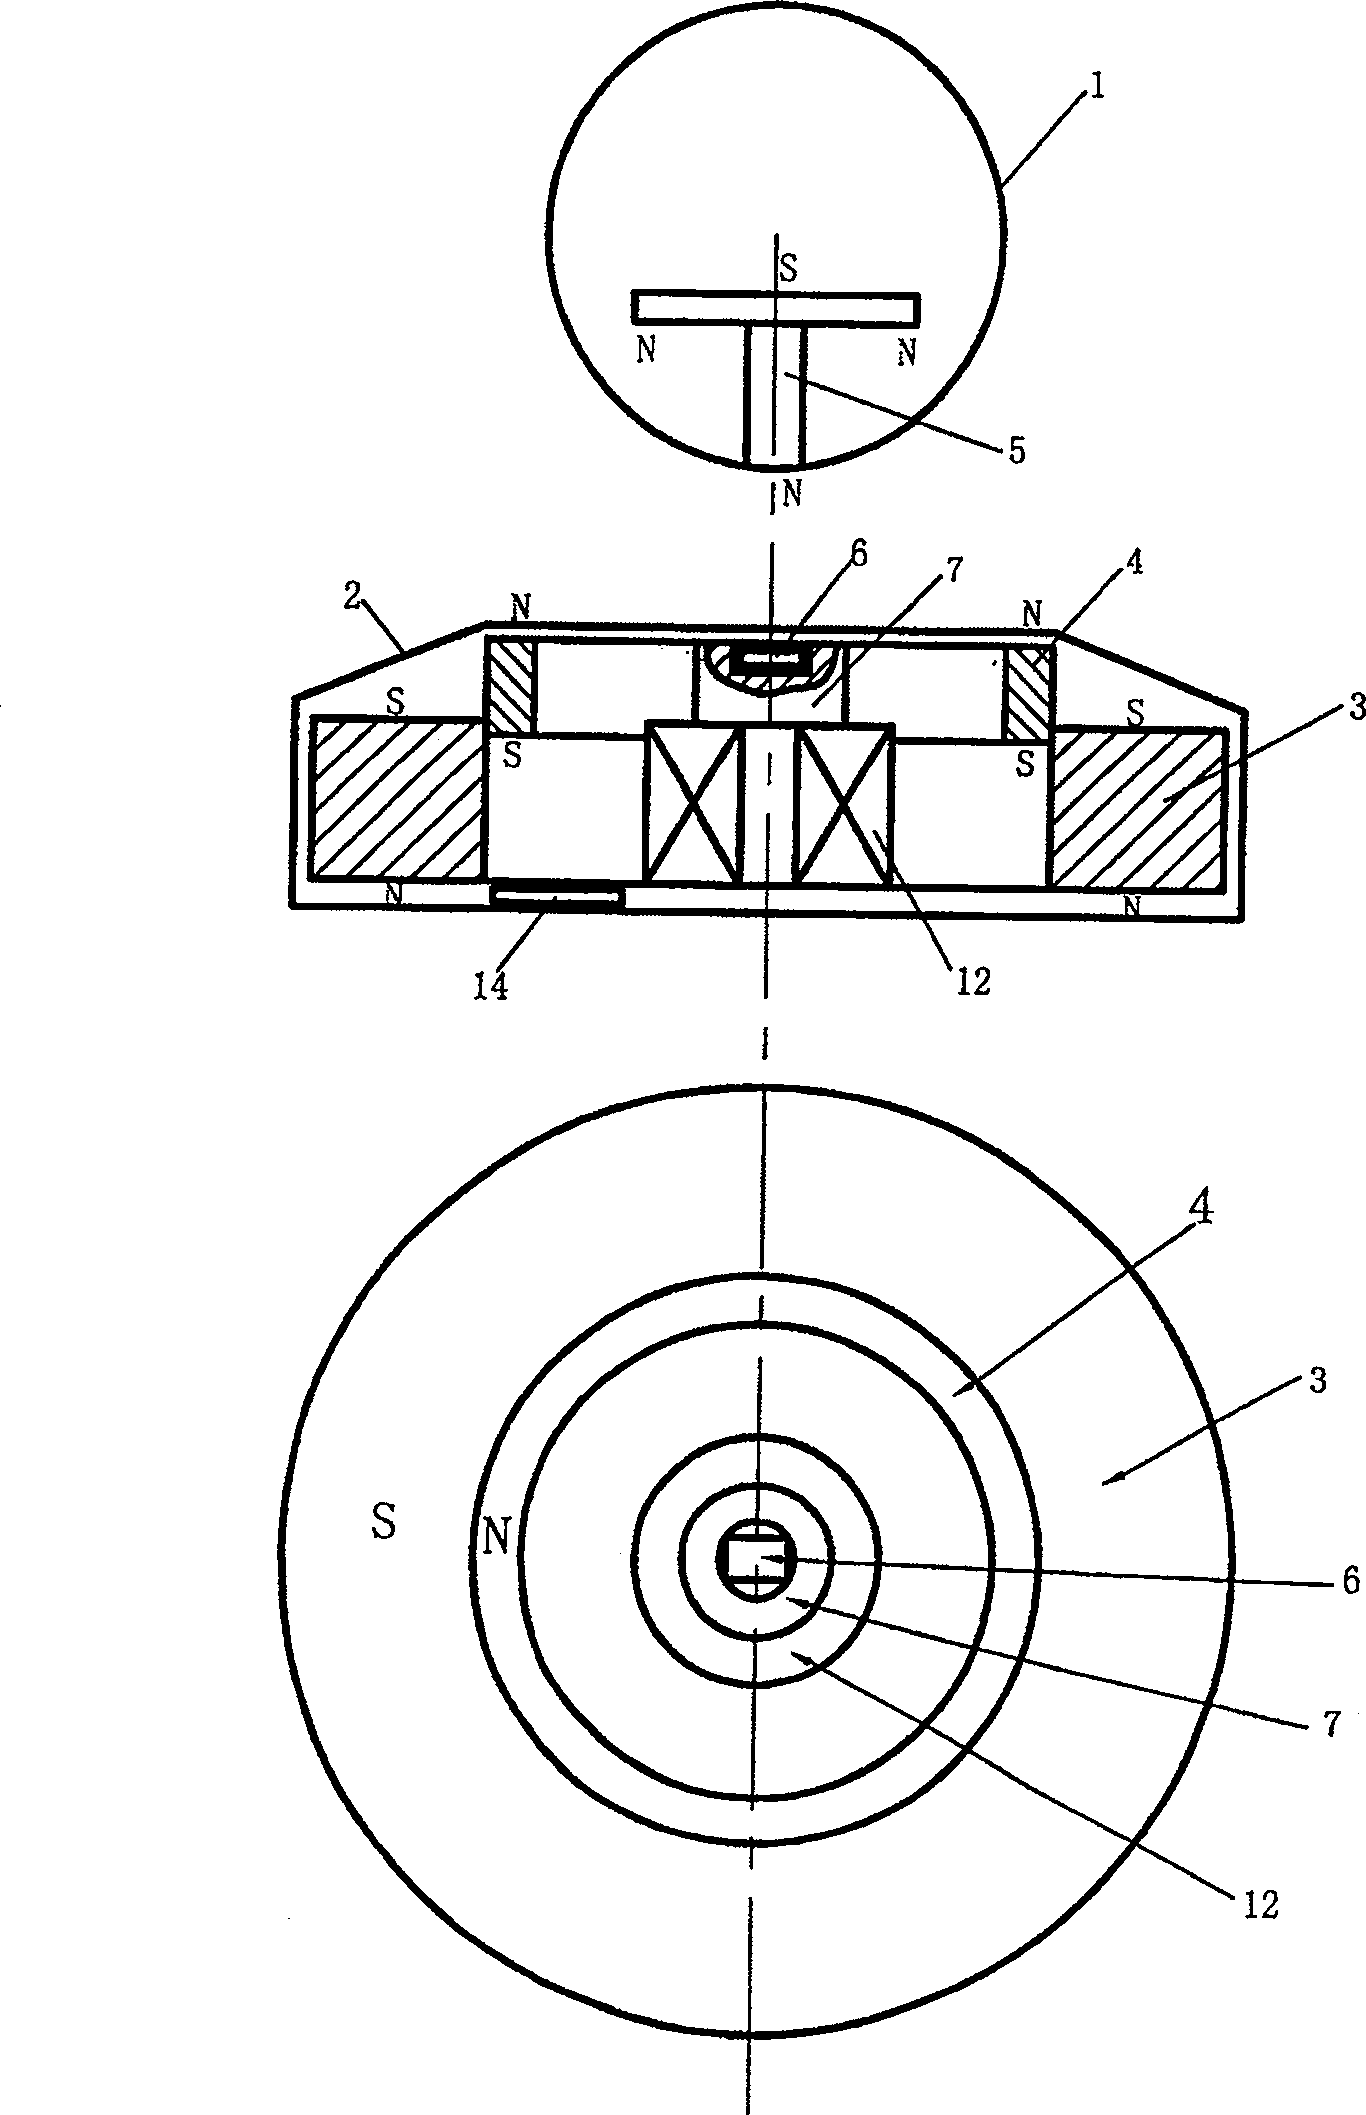 Repulsive levitation device with vertical mobile control mechanism